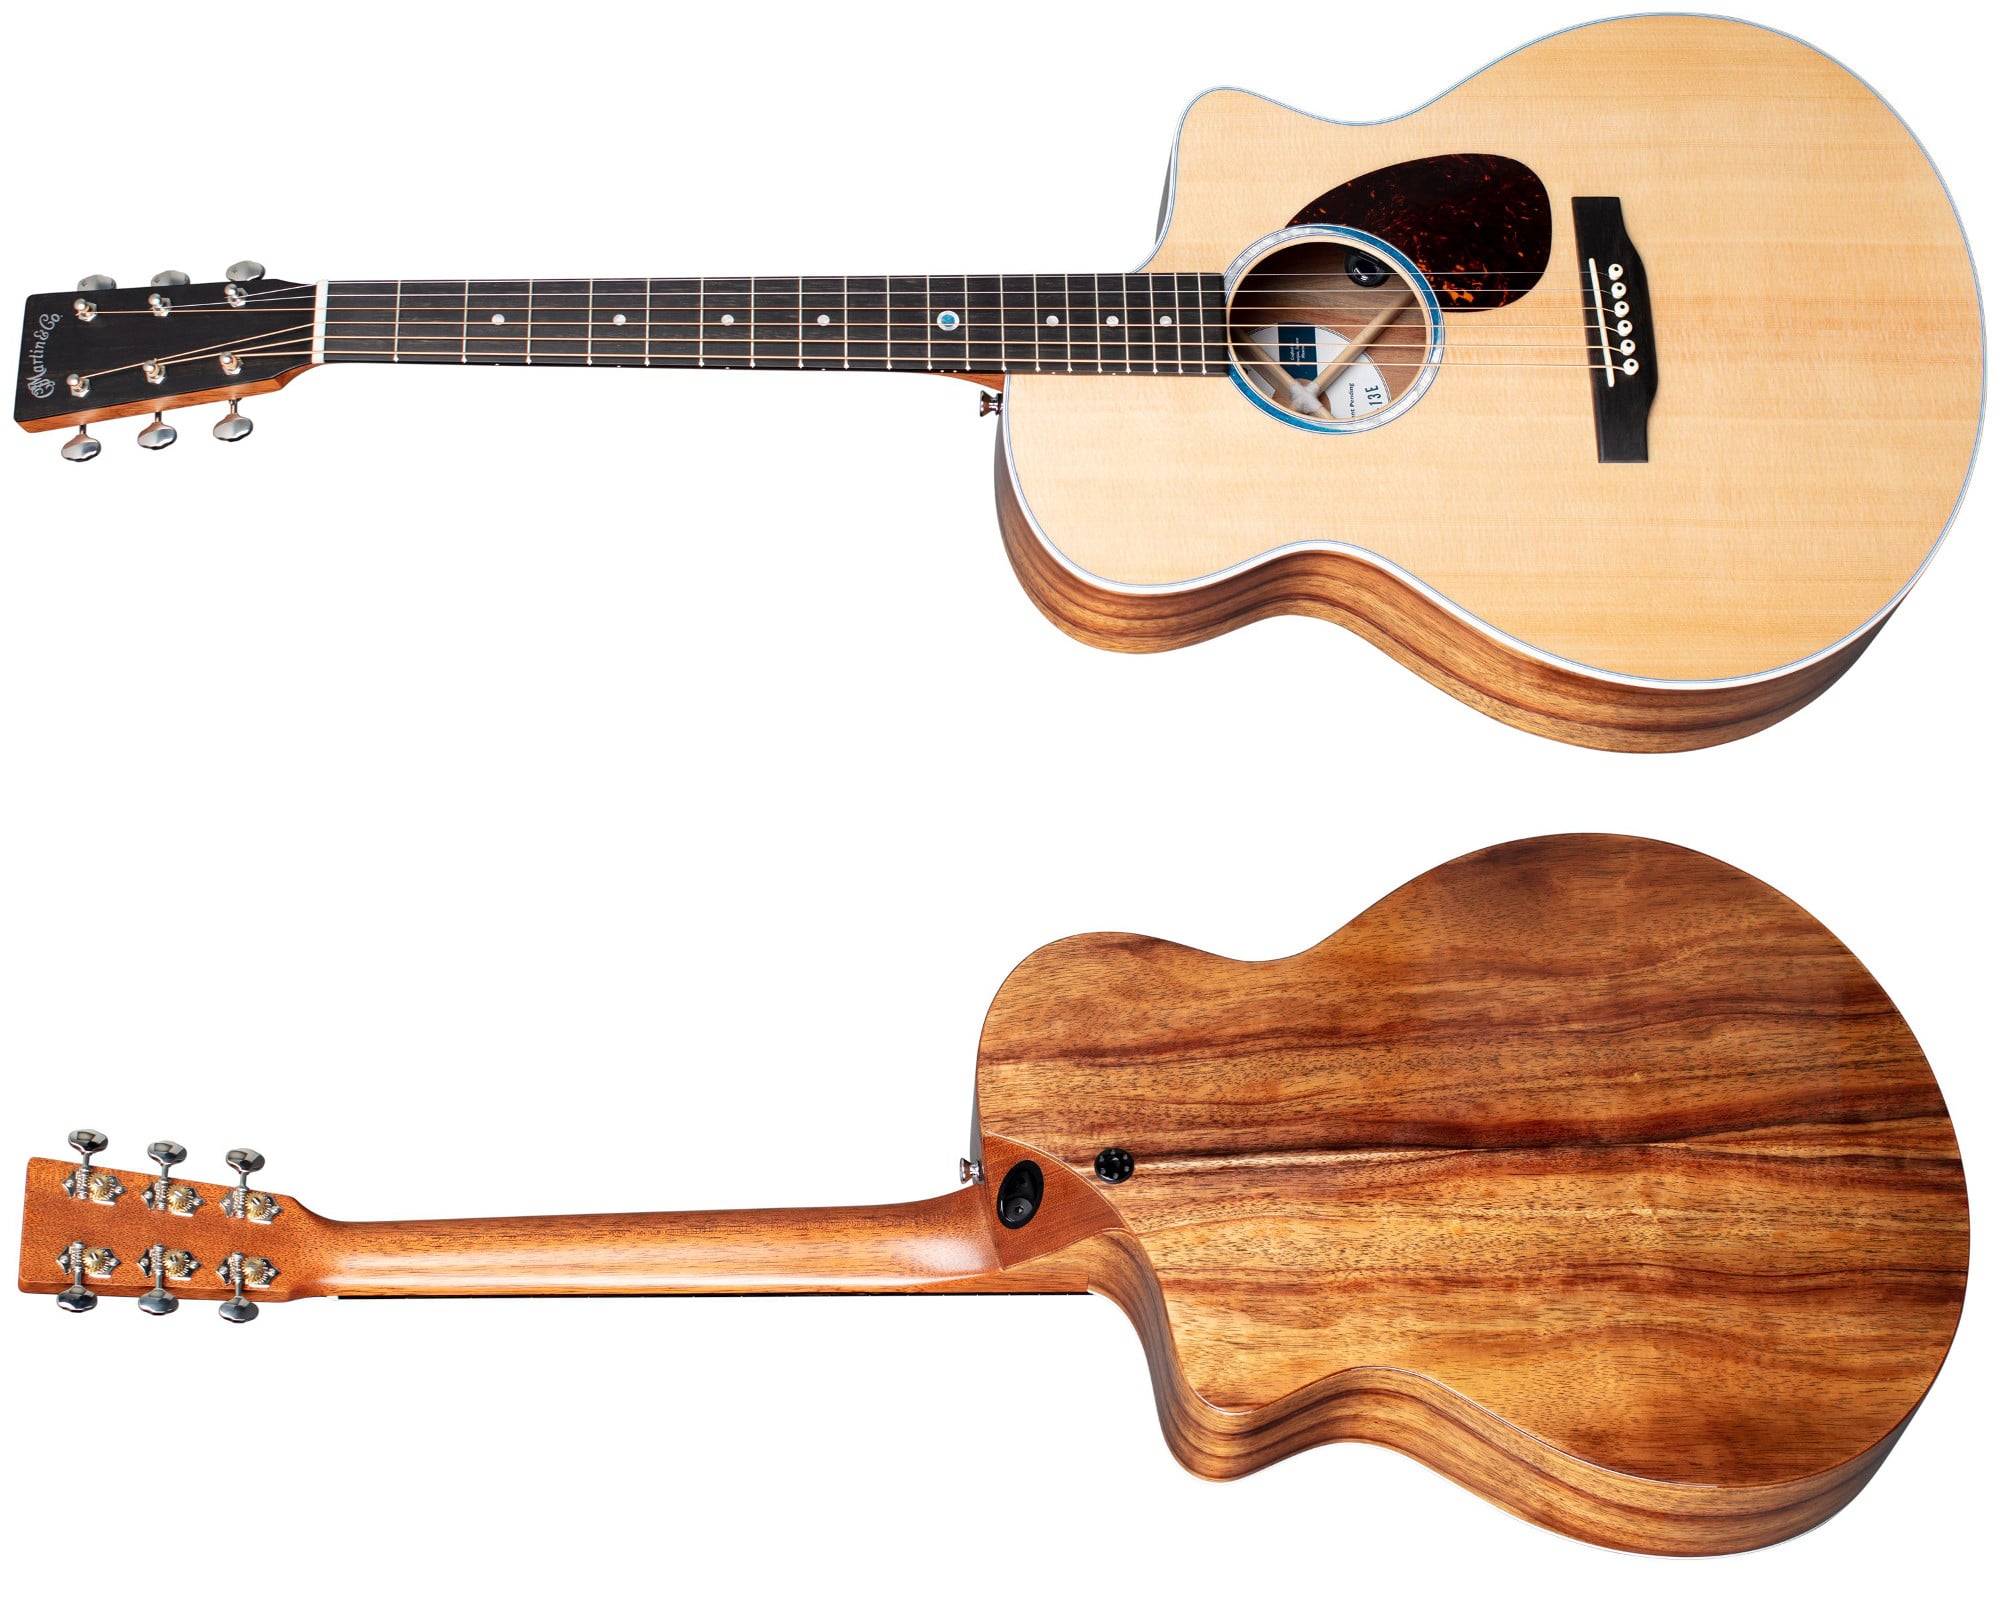 Gearing Up: Reviewing the C.F. Martin & Co. SC-13E Acoustic Guitar